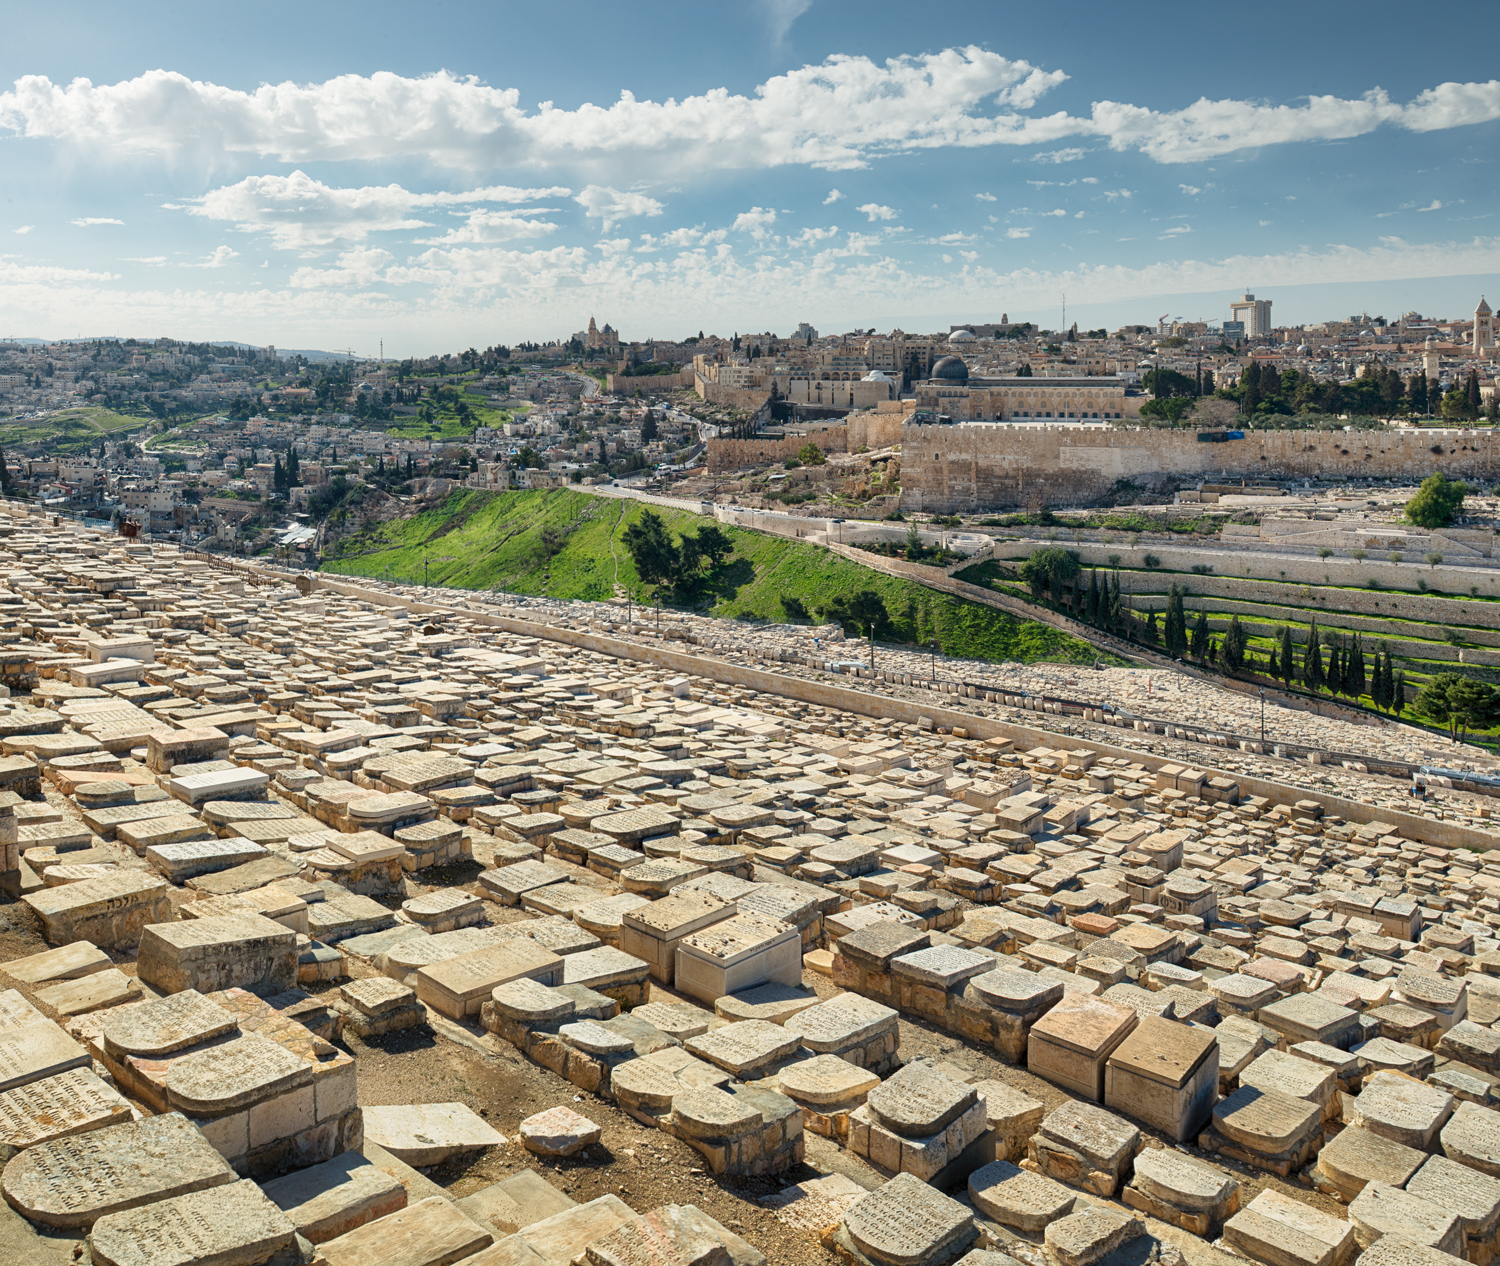  A Jewish Cemetery that stretched as far as the eye could see it seemed.&nbsp; Looking west you see the Old City of Jerusalem. 